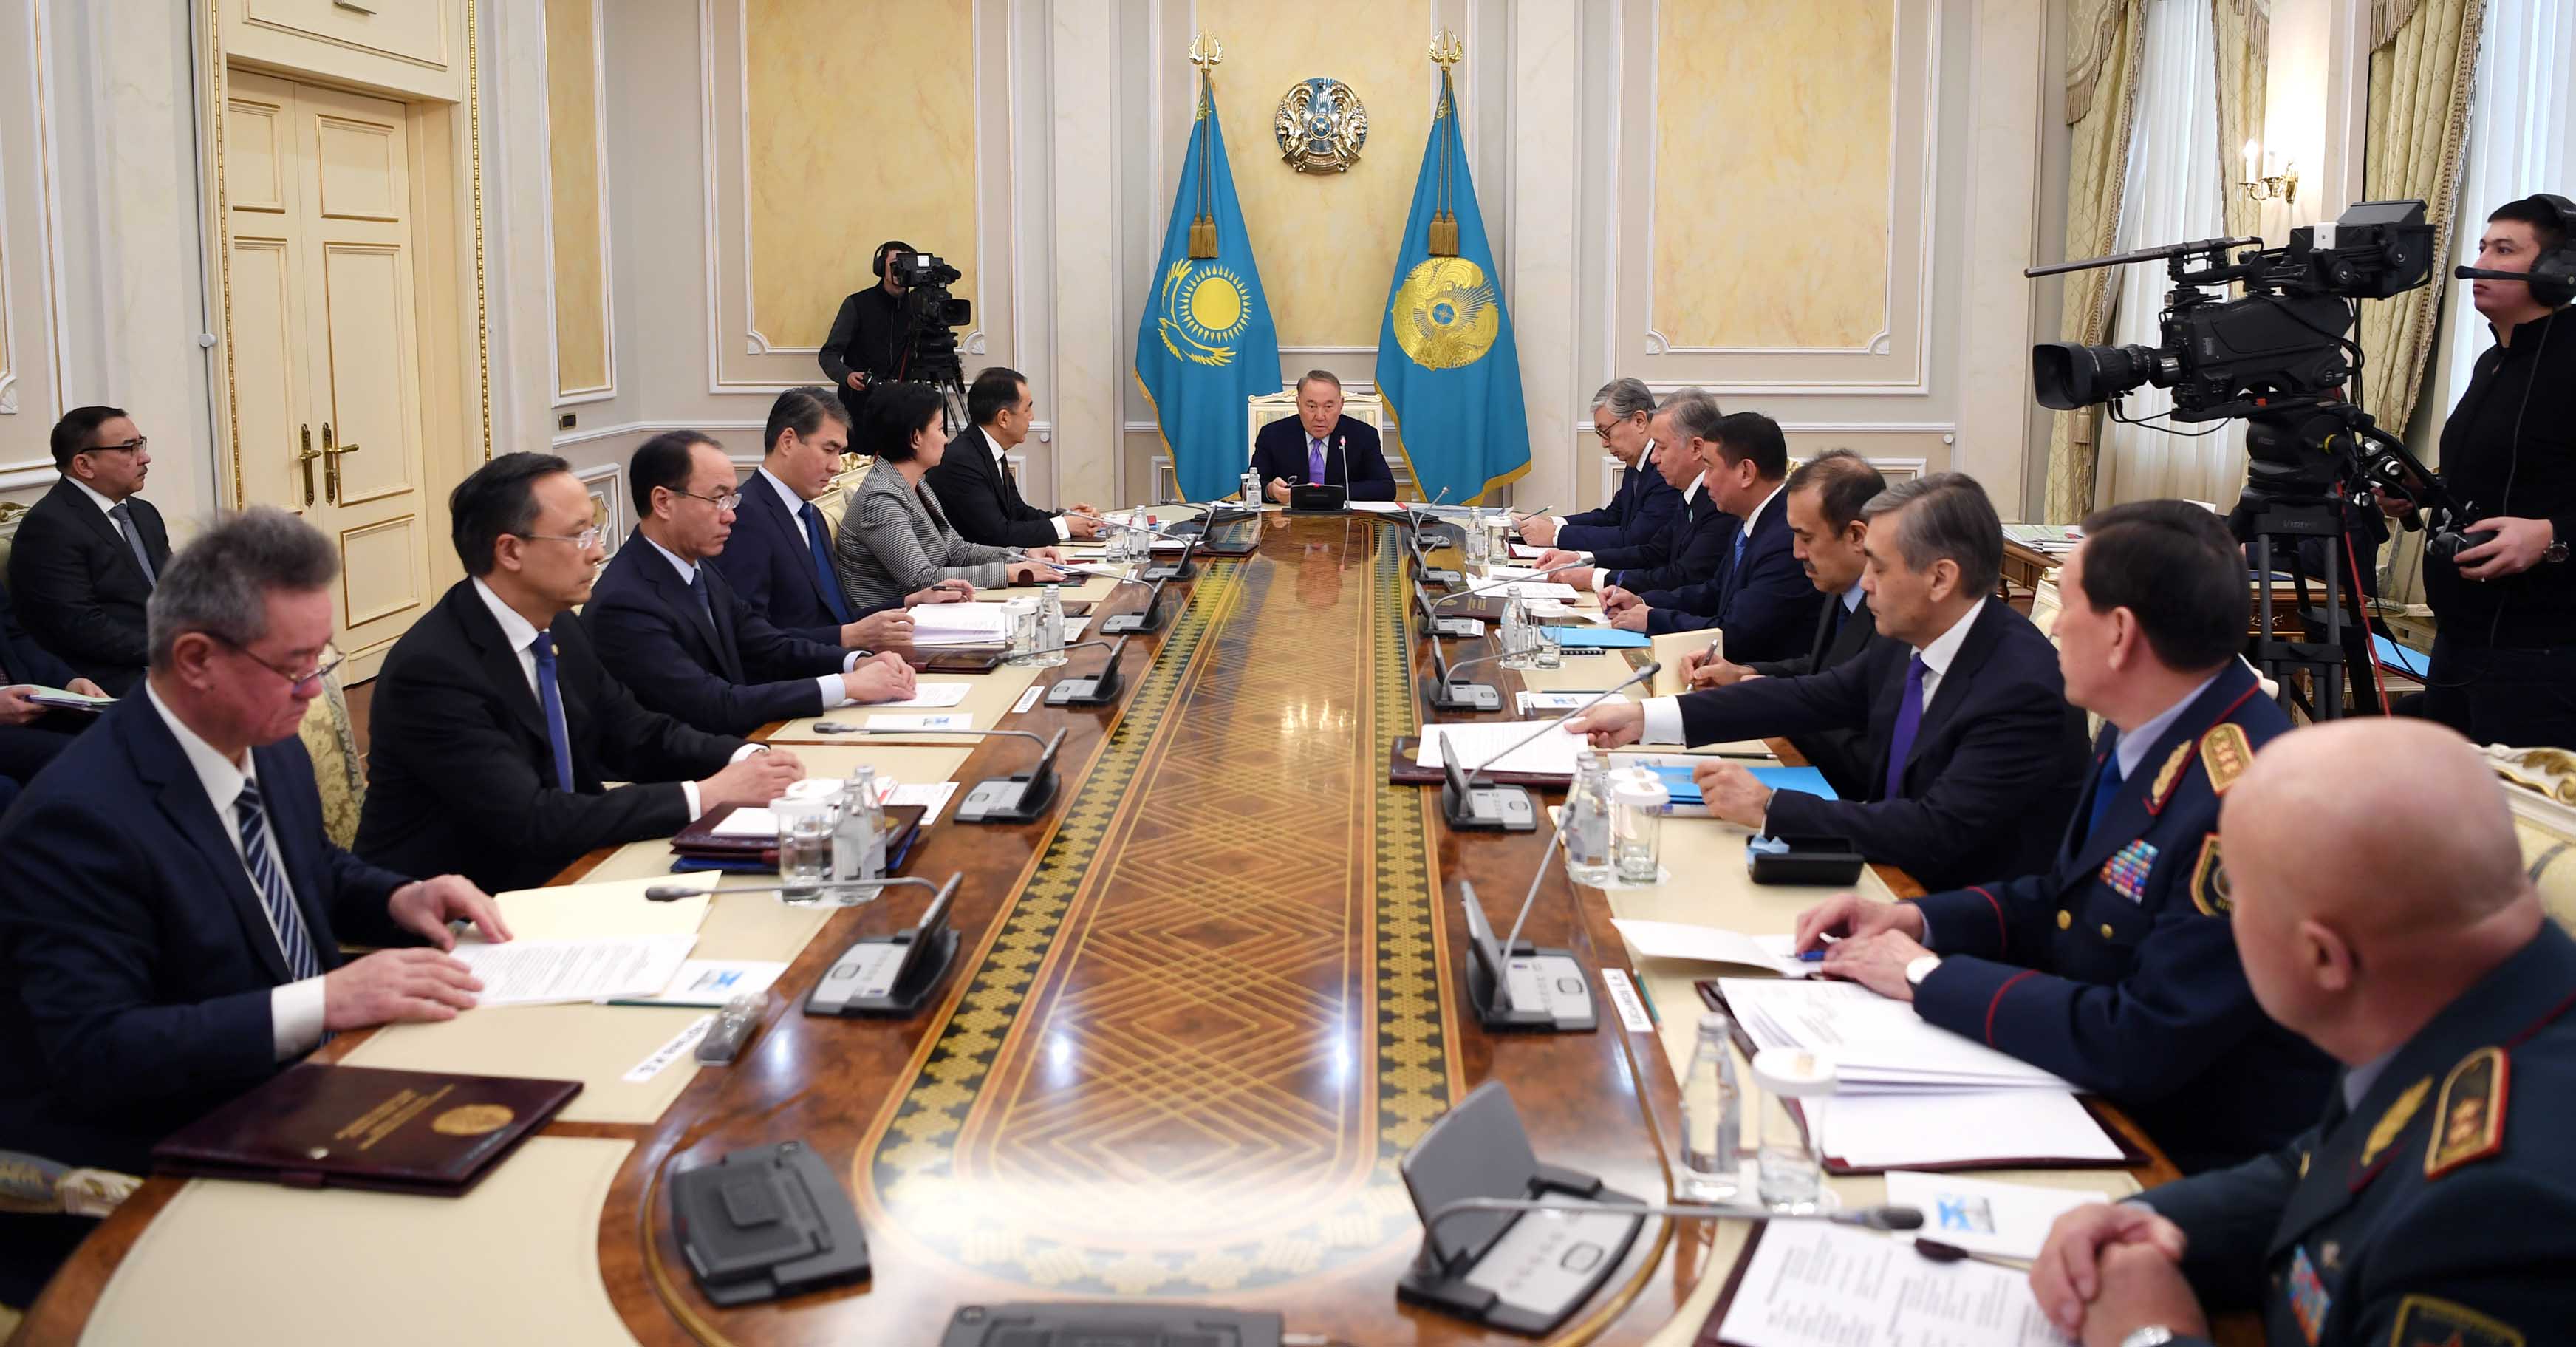  Nursultan Nazarbayev chaired a meeting of the Security Council